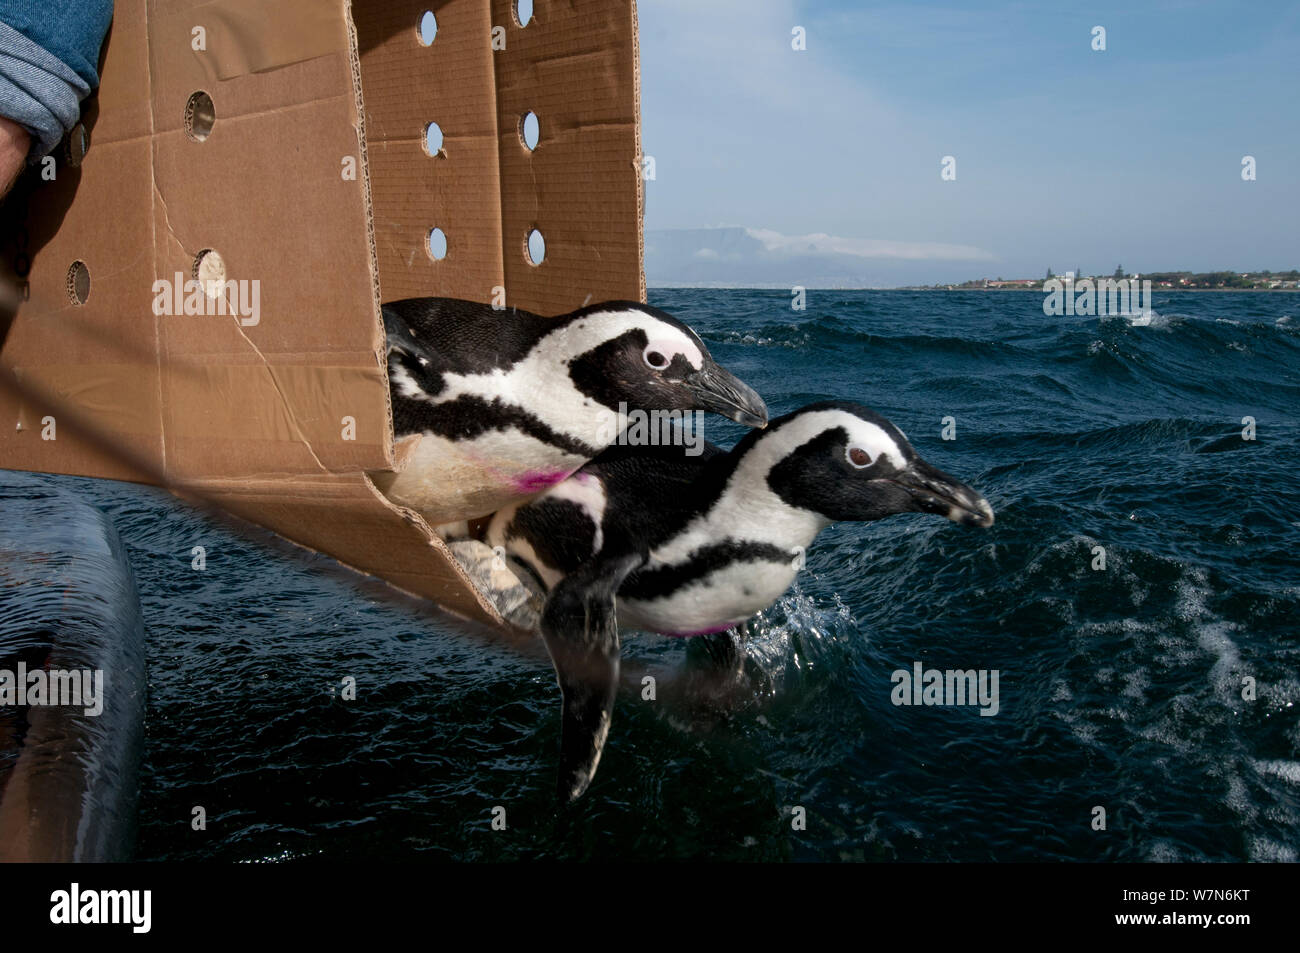 Black footed penguins (Spheniscus demersus) are released at sea near Robben Island, Table Bay after rehabilitation at Southern African Foundation for the Conservation of Coastal Birds (SANCCOB) Cape Town, South Africa 2011 Stock Photo